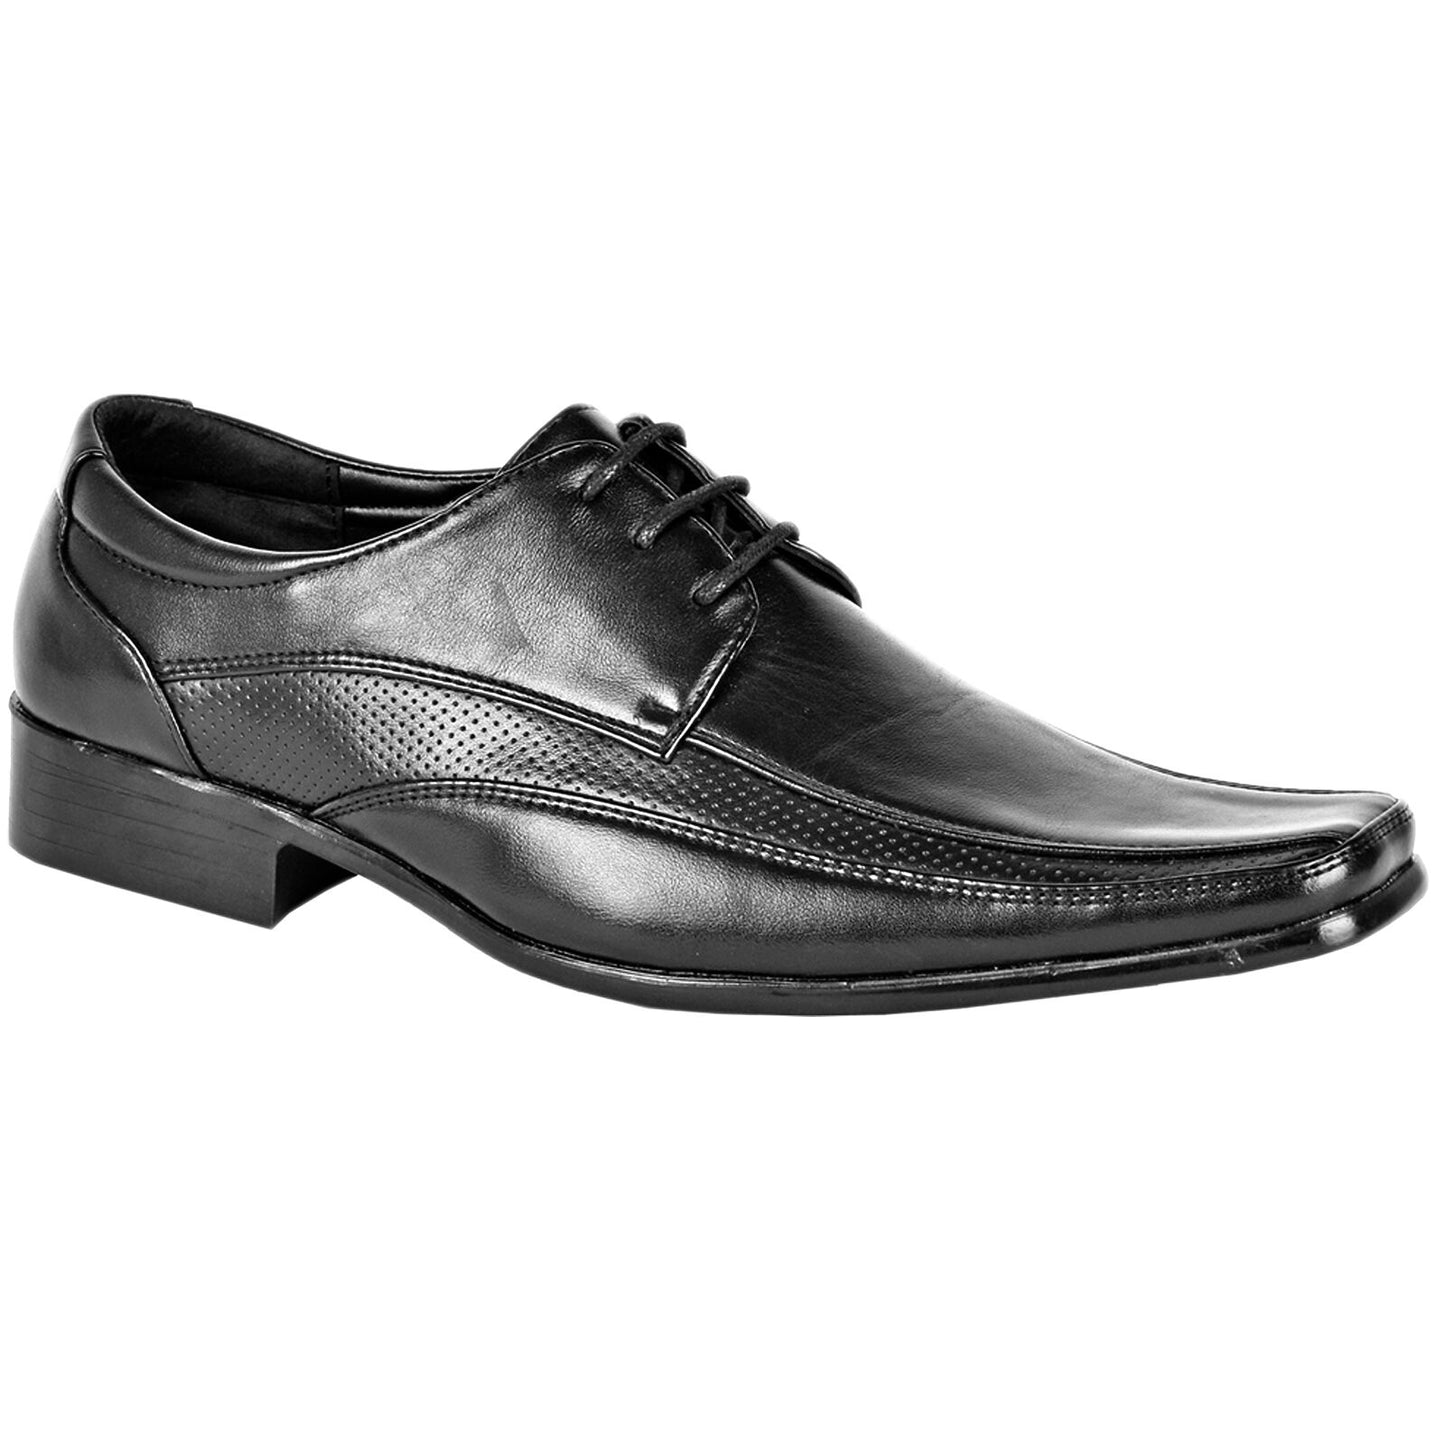 MENS FORMAL SHOES LEATHER SMART DRESS WEDDING OFFICE WORK CASUAL ITALIAN BOOTS